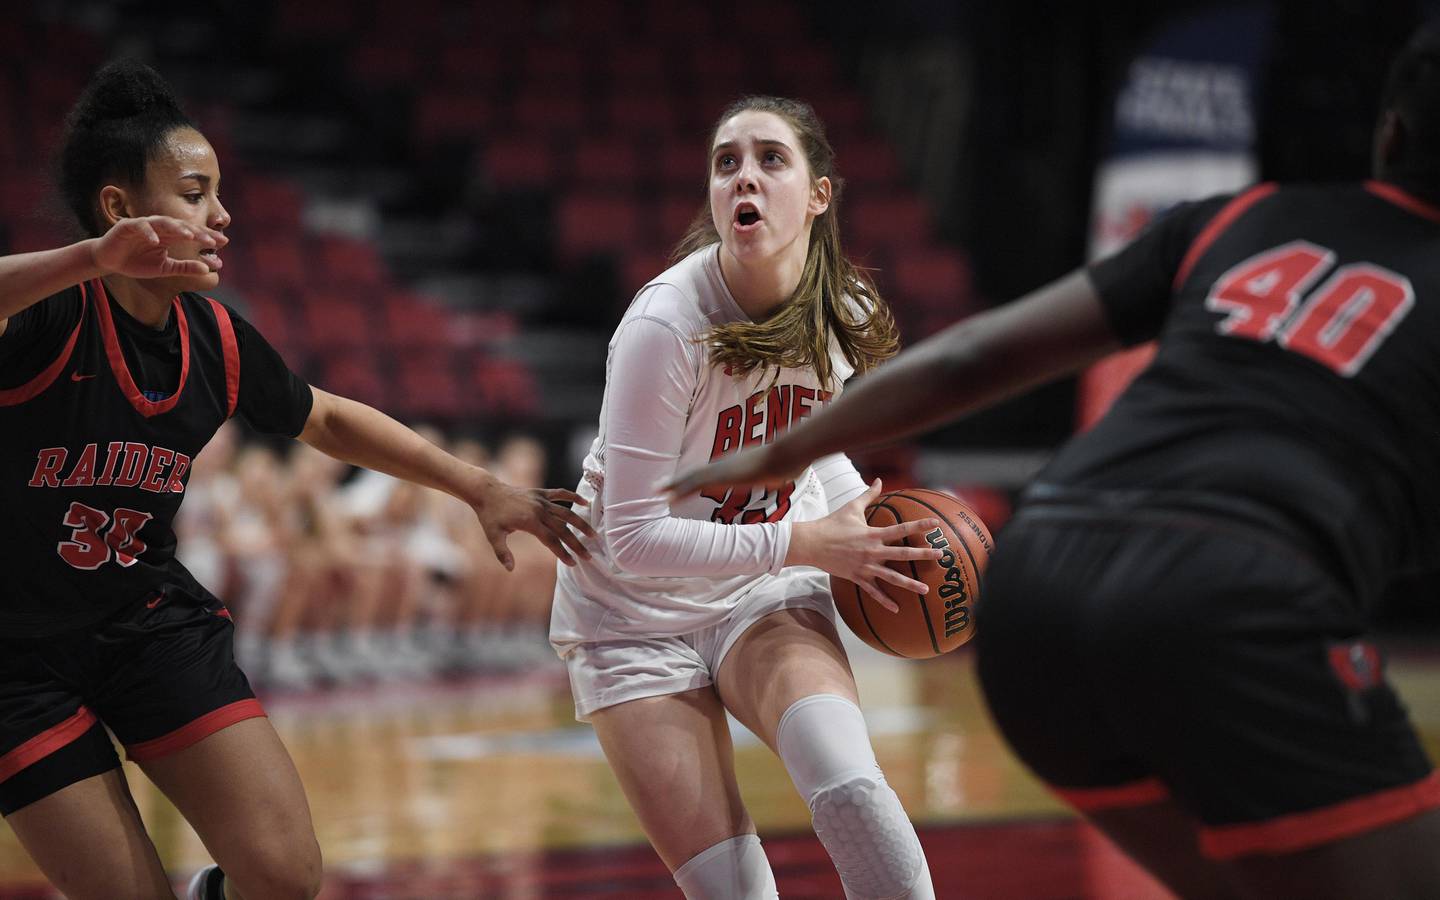 Benet Academy’s Maggie Sularski looks for the hoop as Bolingbrook's Angelina Smith and Jasmine Jones, right, defend in the Class 4A state 3rd place game at Redbird Arena at Illinois State University in Normal on Friday, March 4, 2022.